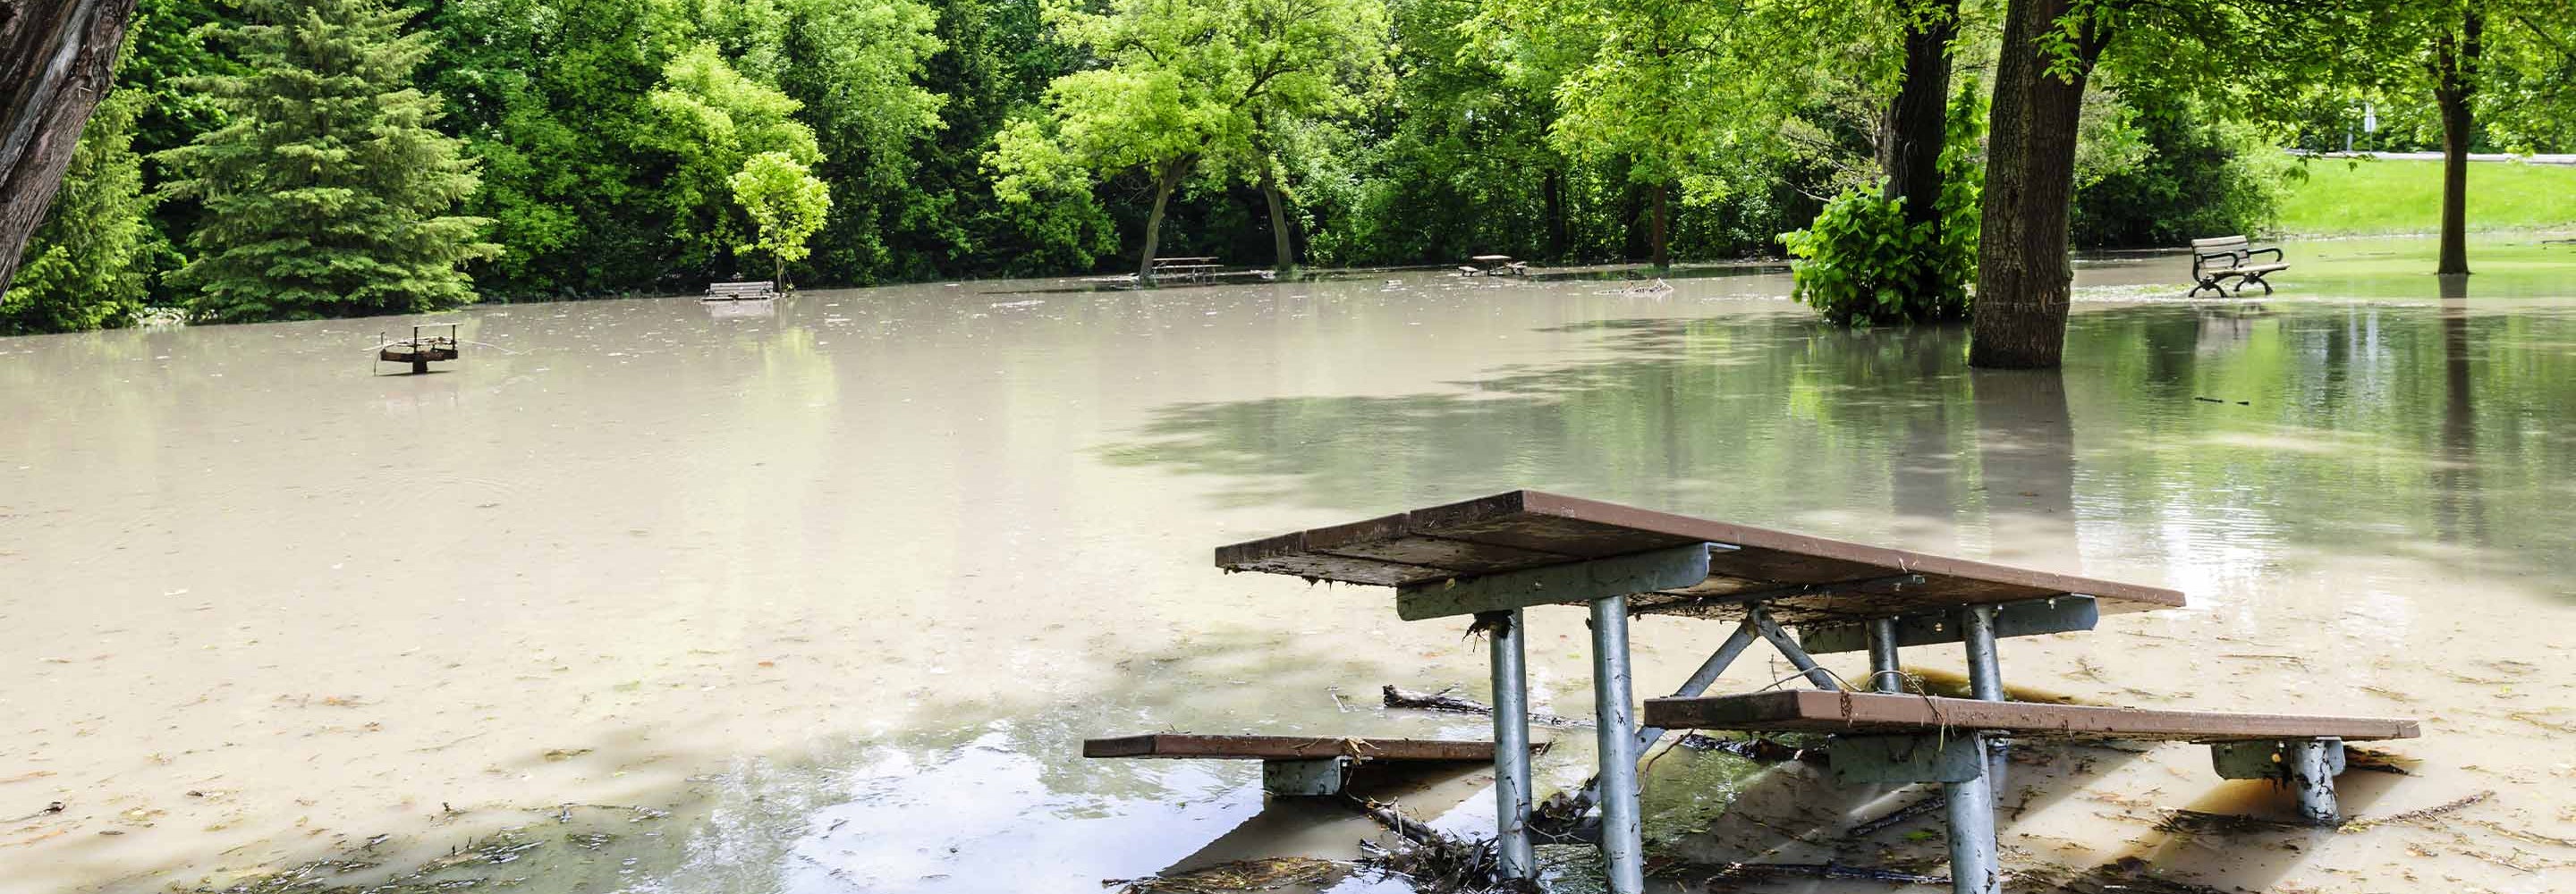 There is flooding in Madisonville. Protect yourself from mold and follow health recommendations. Click here.